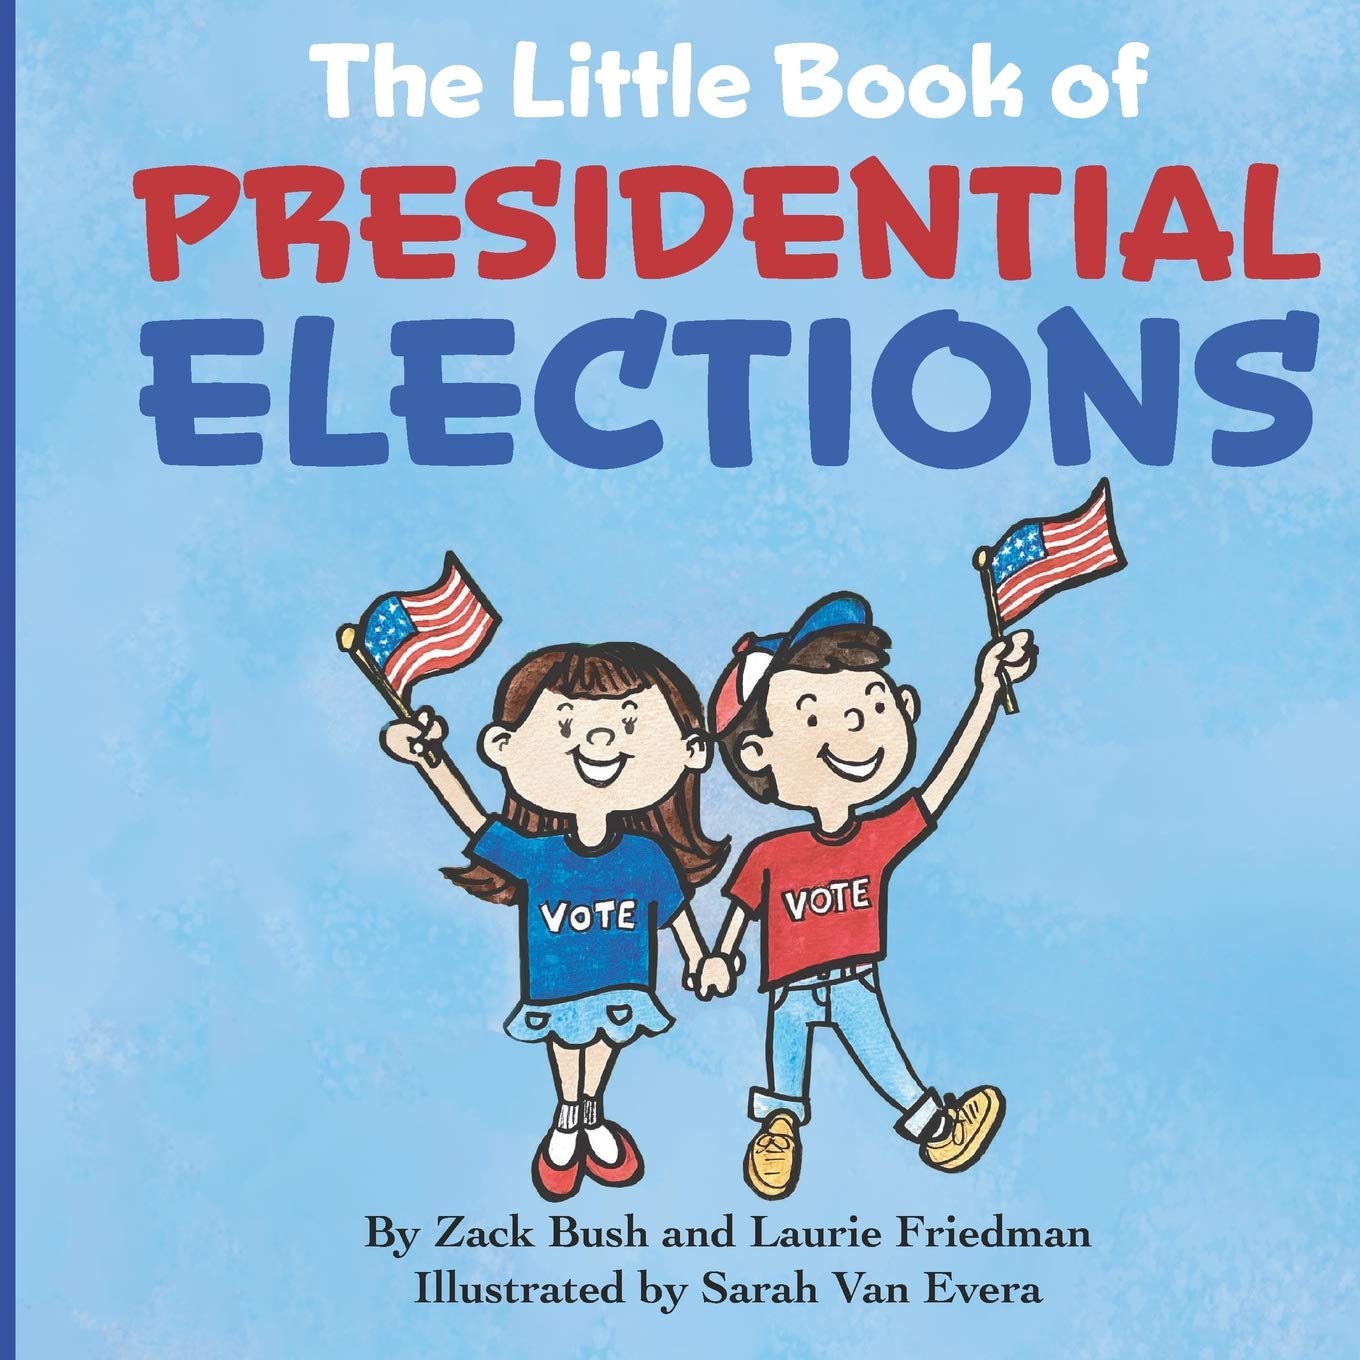 The Little Book of Presidential Elections